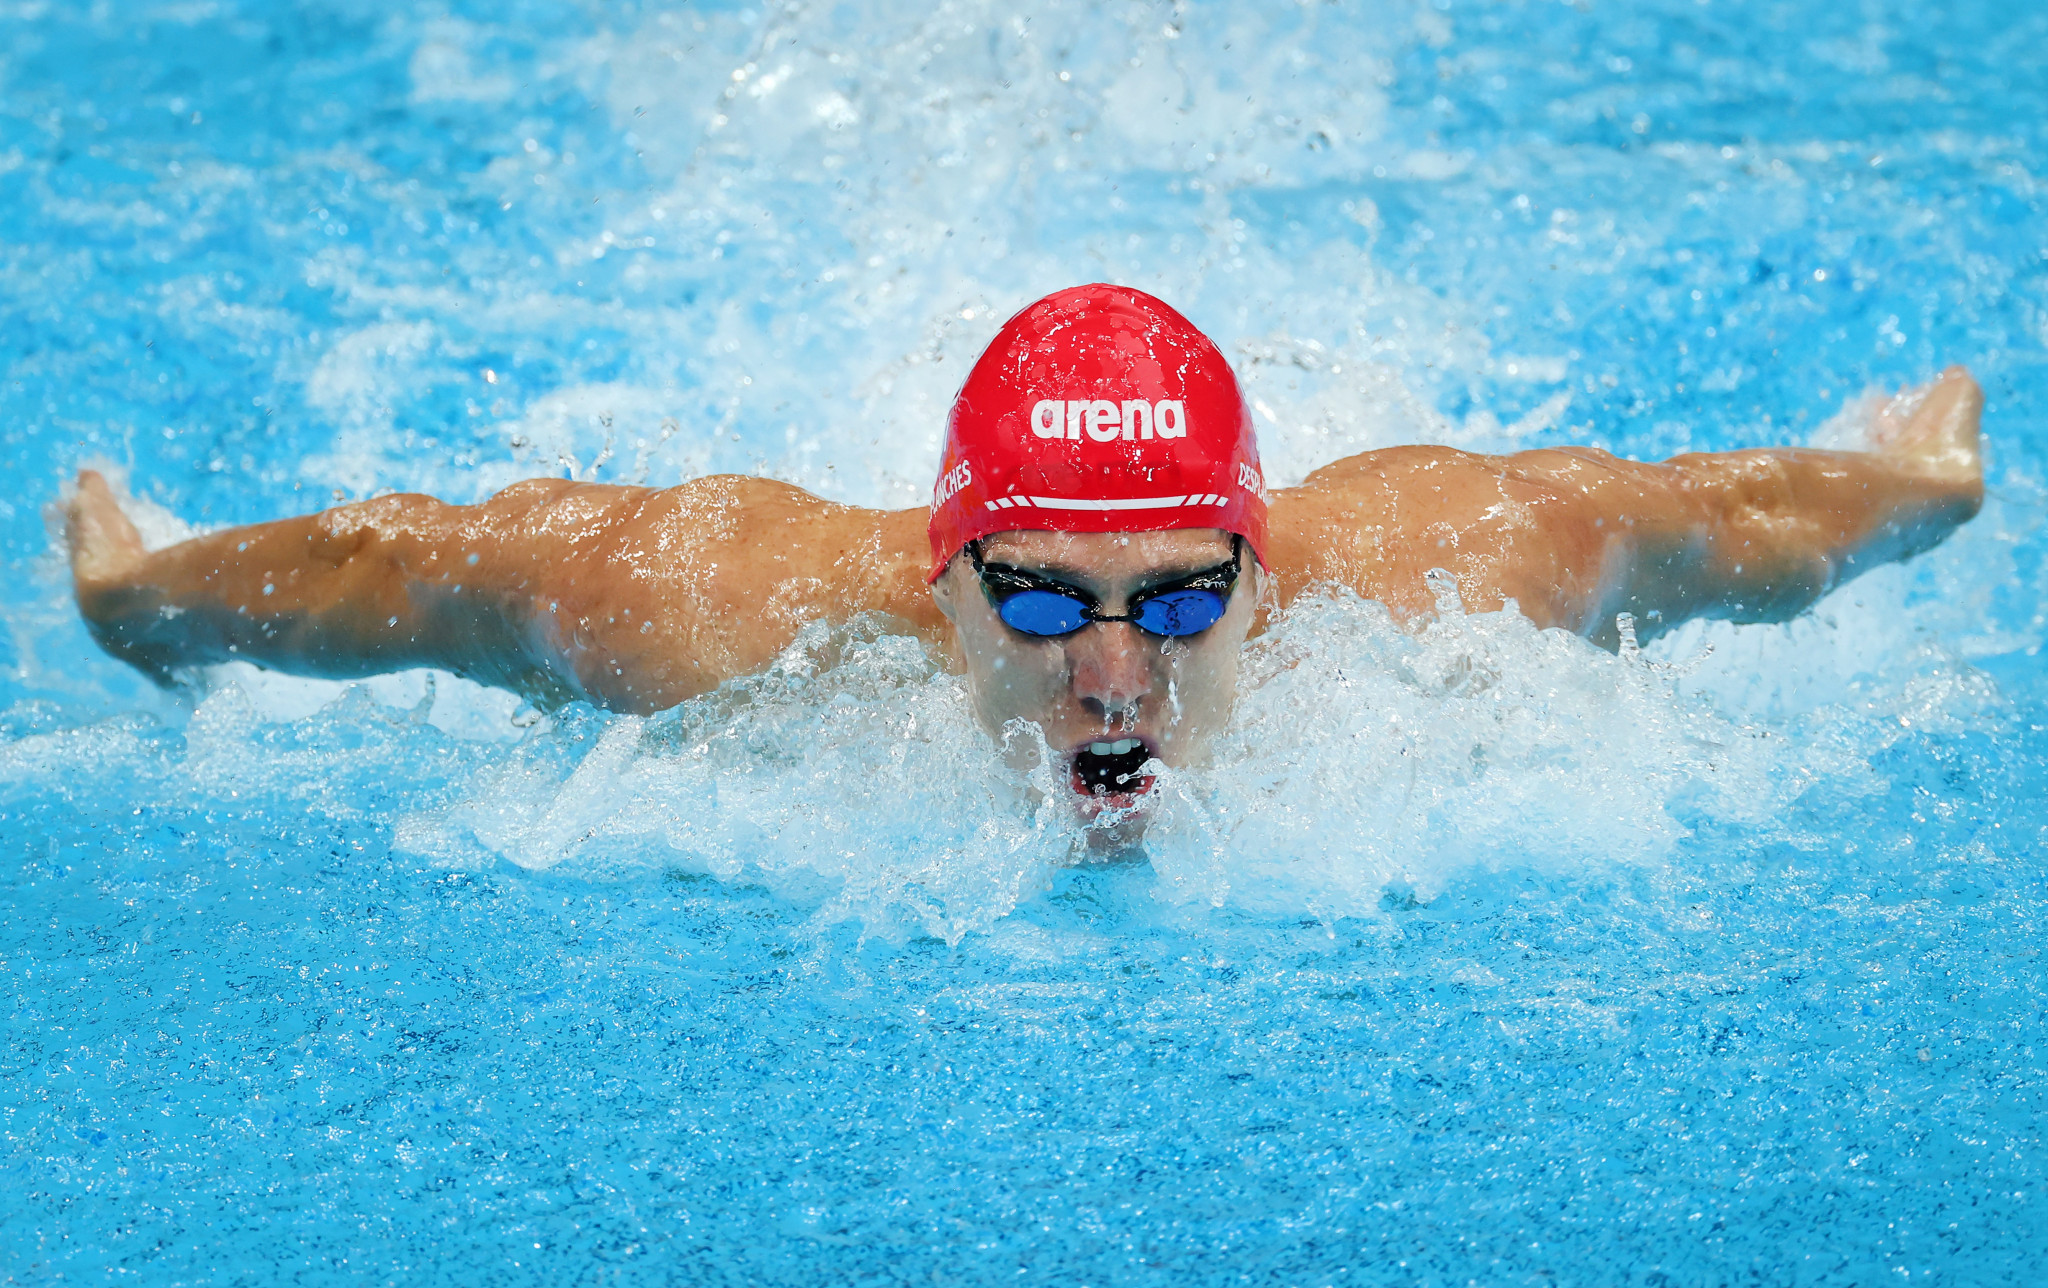 Swiss Aquatics is concerned about the prospect of Russian and Belarusian athletes competing as neutrals at the World Championships ©Getty Images